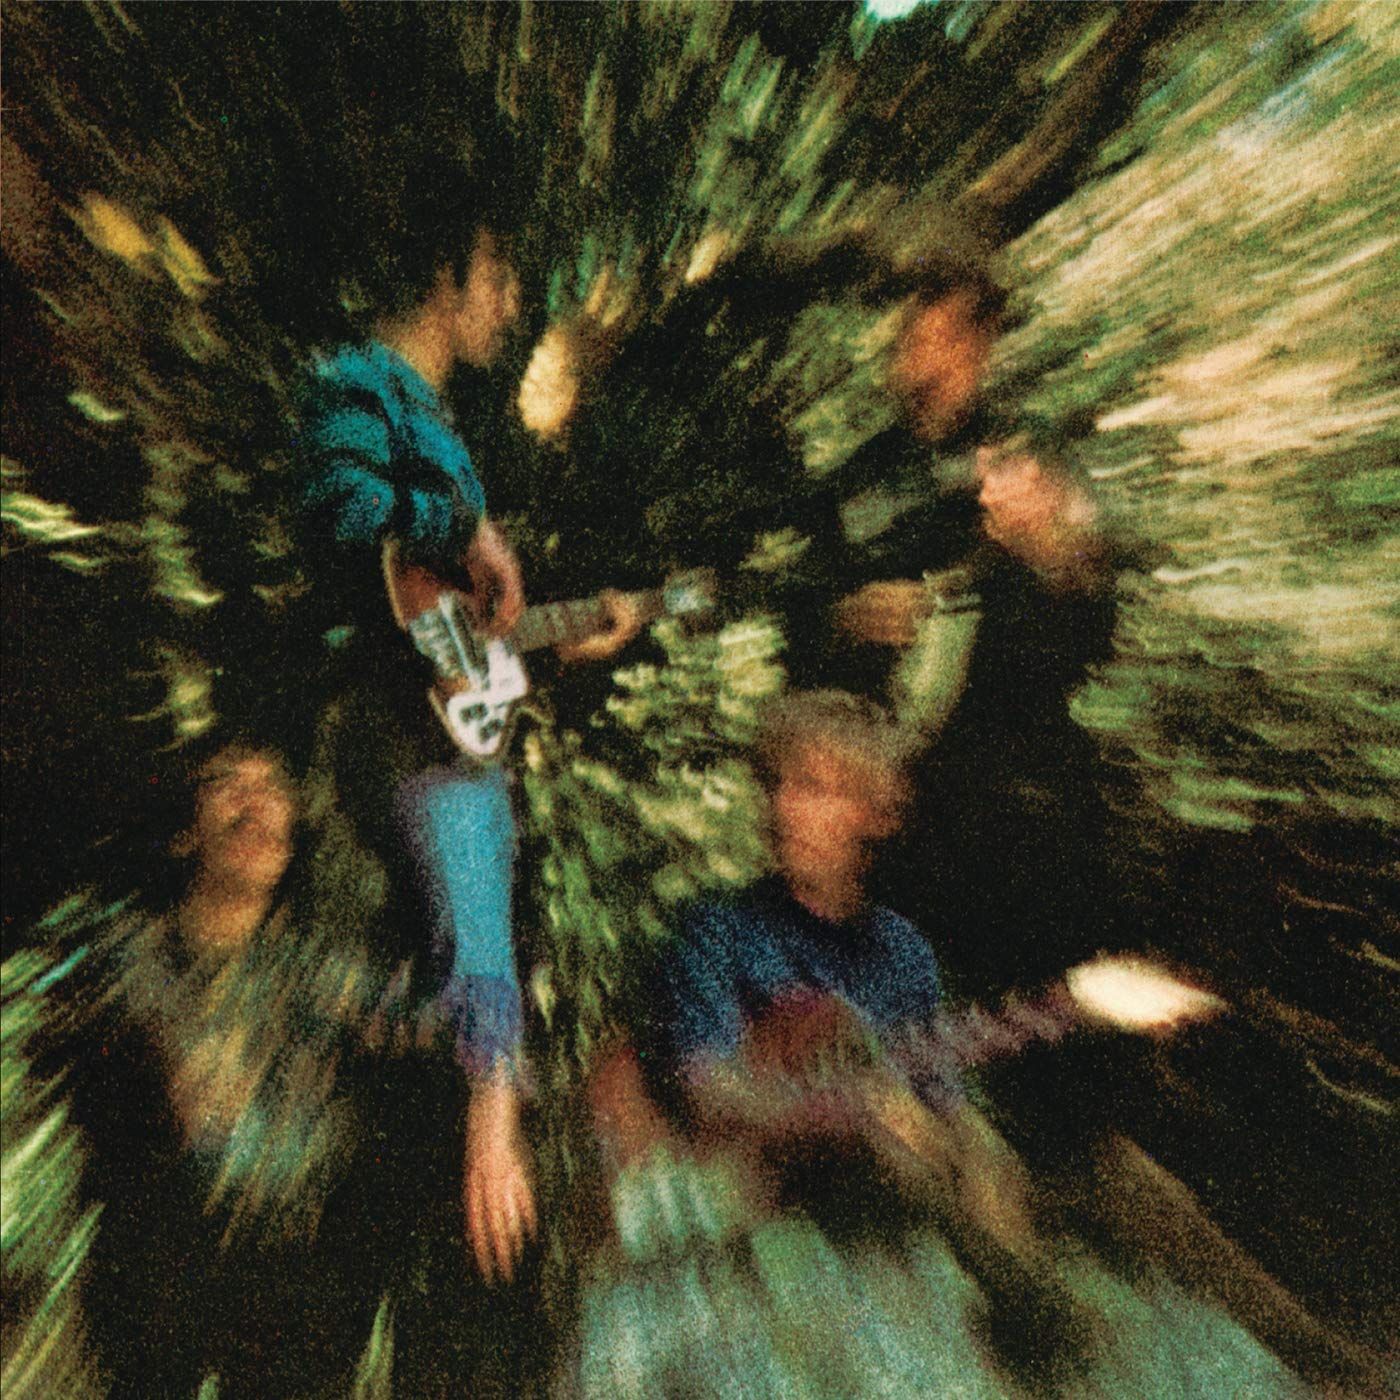 Creedence Clearwater Revival - Bayou Country (2019 180g reissue half-speed analogue remaster) - Vinyl - New